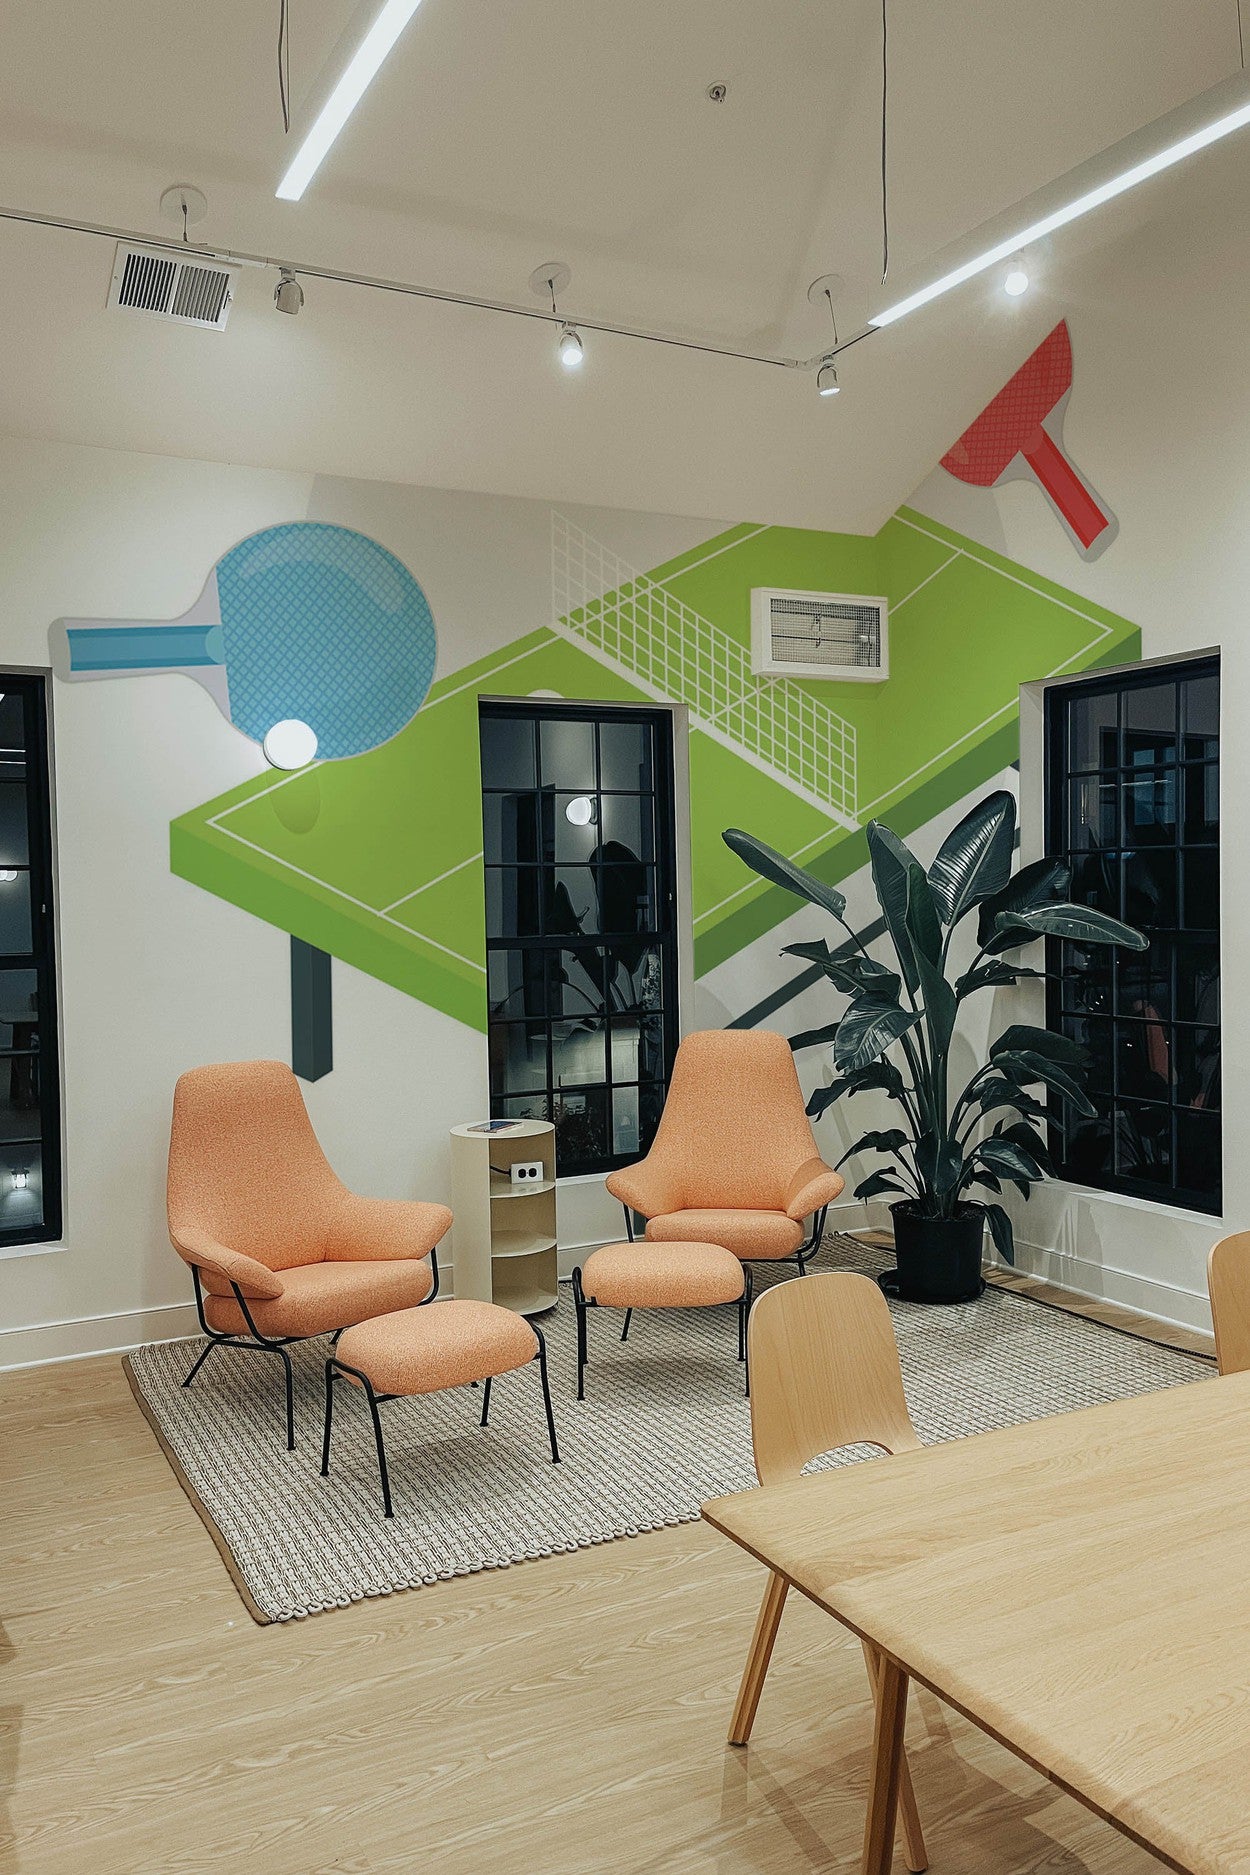 Modern office meeting room with brightly colored wall mural depicting oversized tennis rackets and a tennis ball